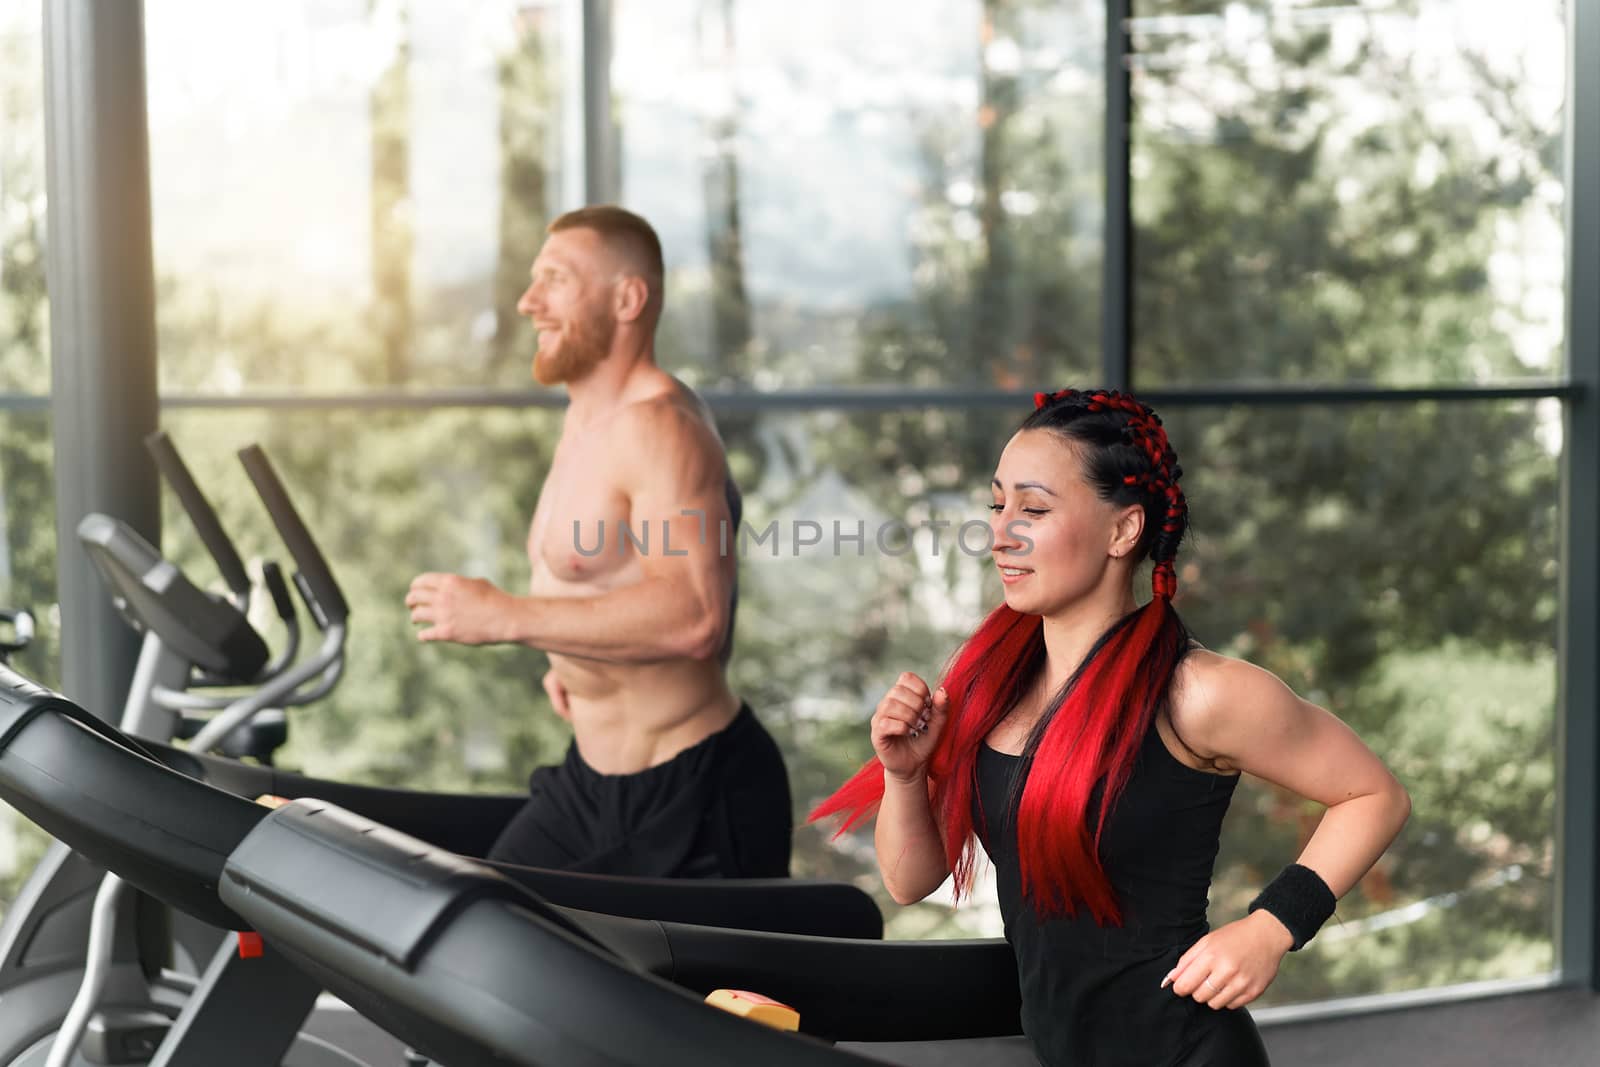 Gym treadmill running trainer man woman training together jogging fitness workout. by andreonegin